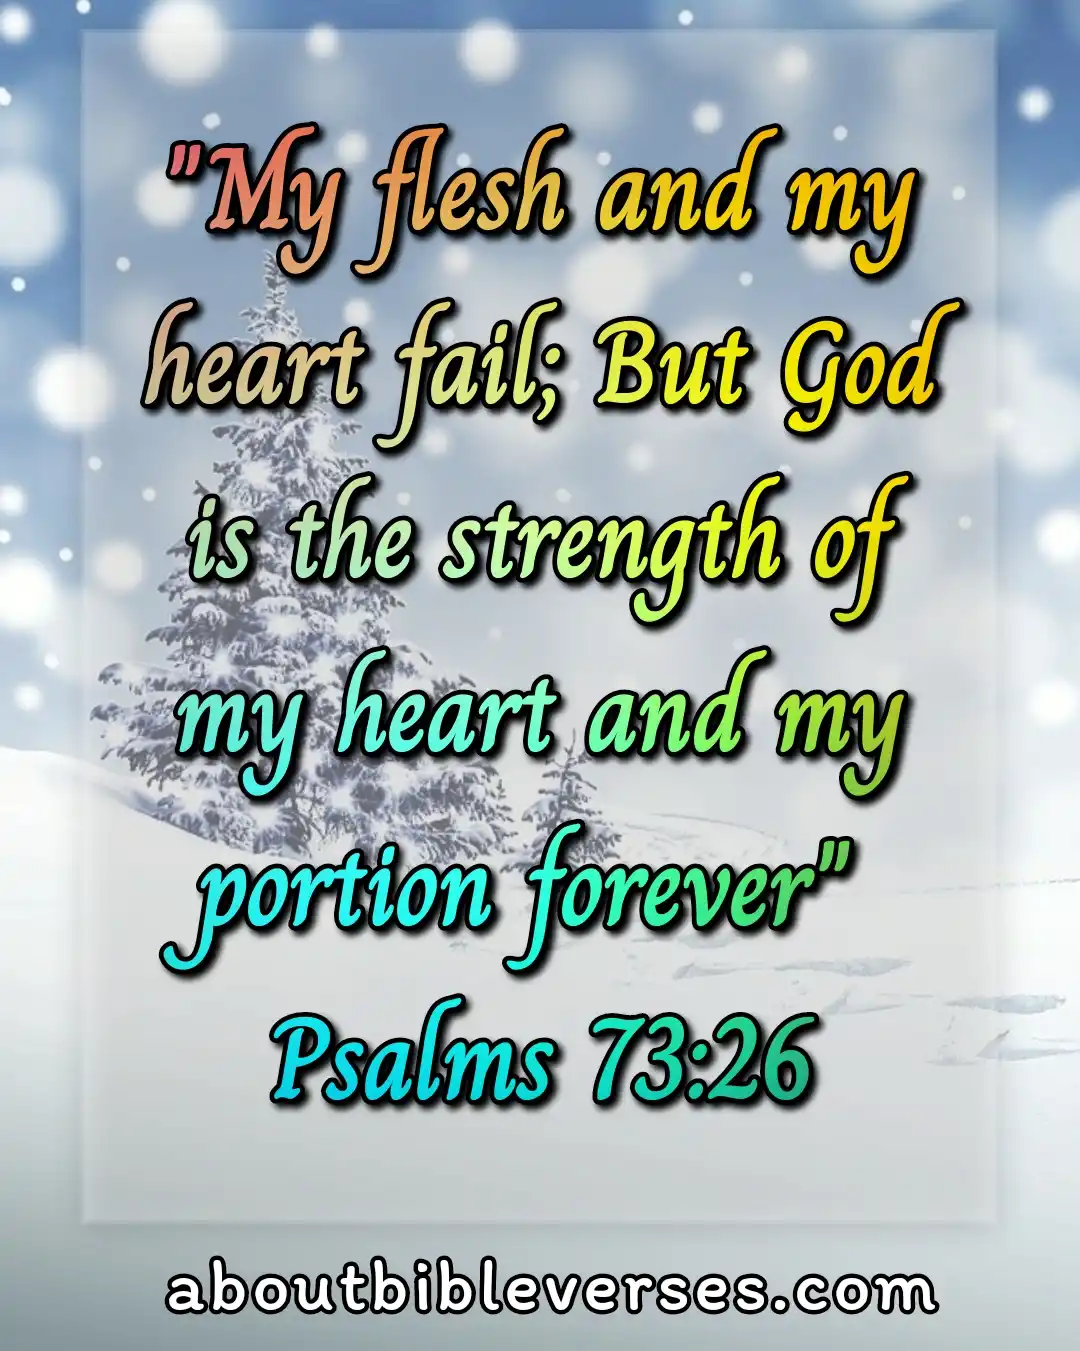 today bible verses (Psalm 73:26)